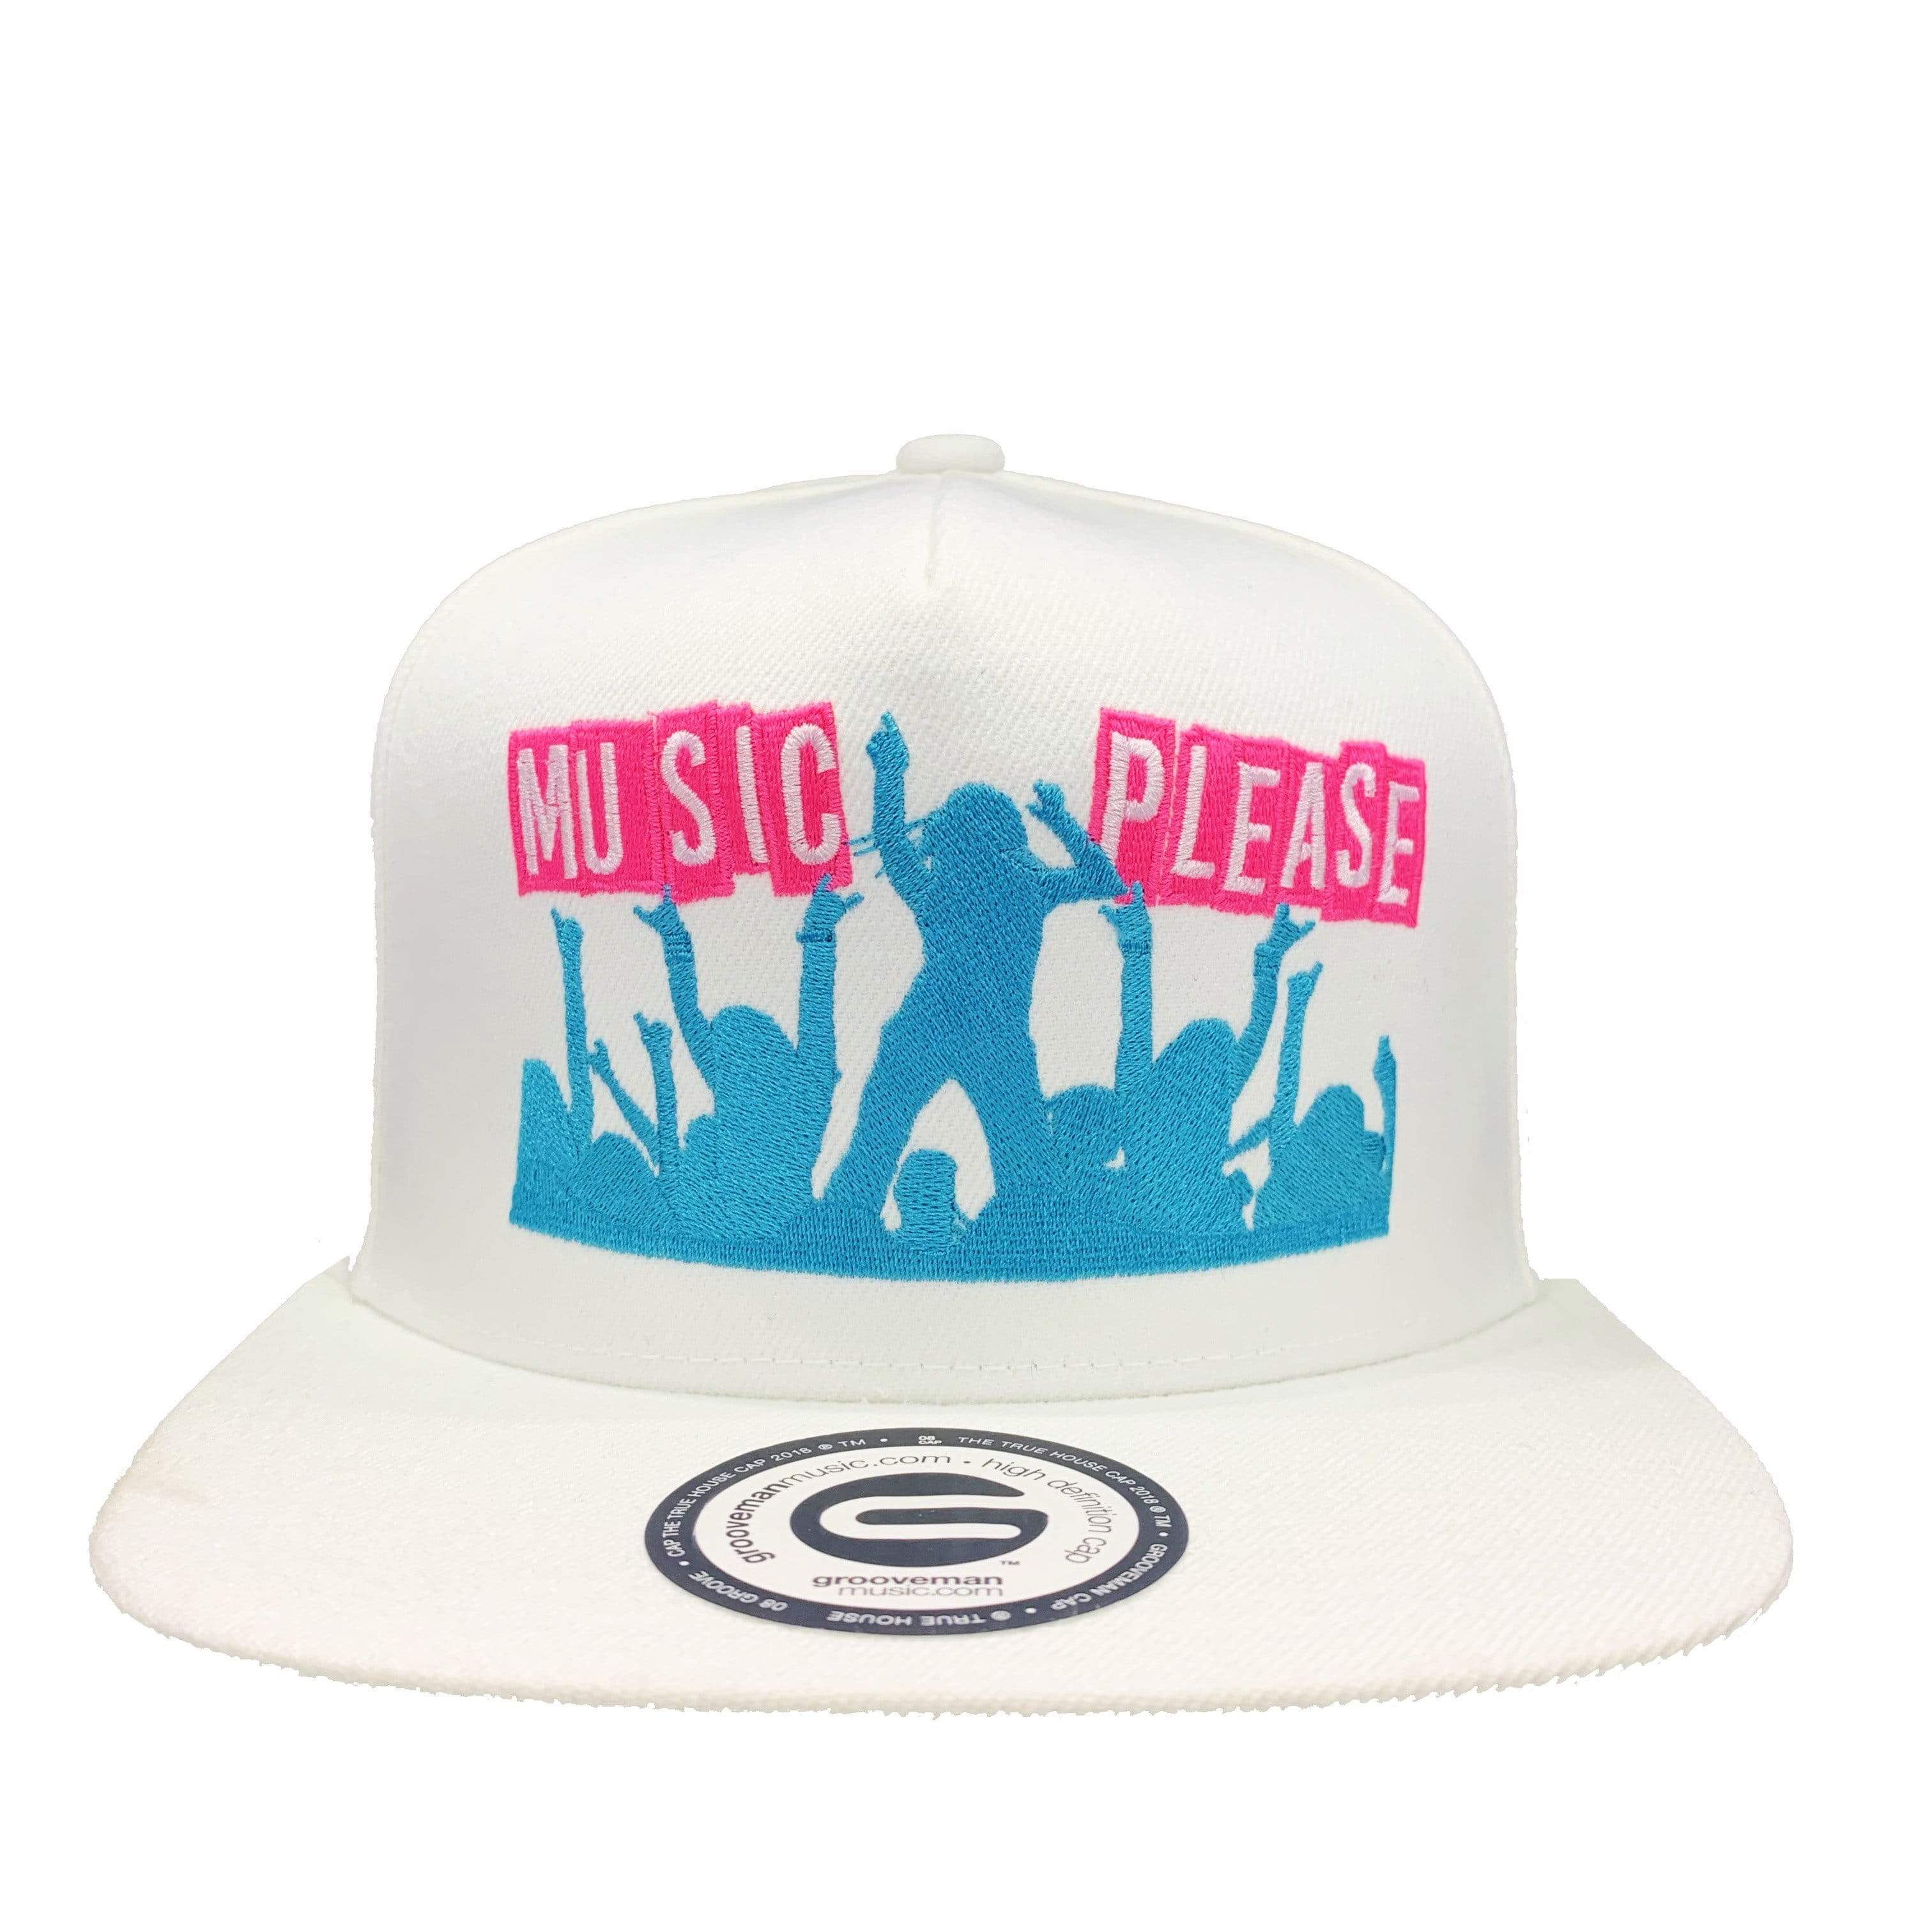 Grooveman Music Hats One Size / White Music Please Dancing Snapback